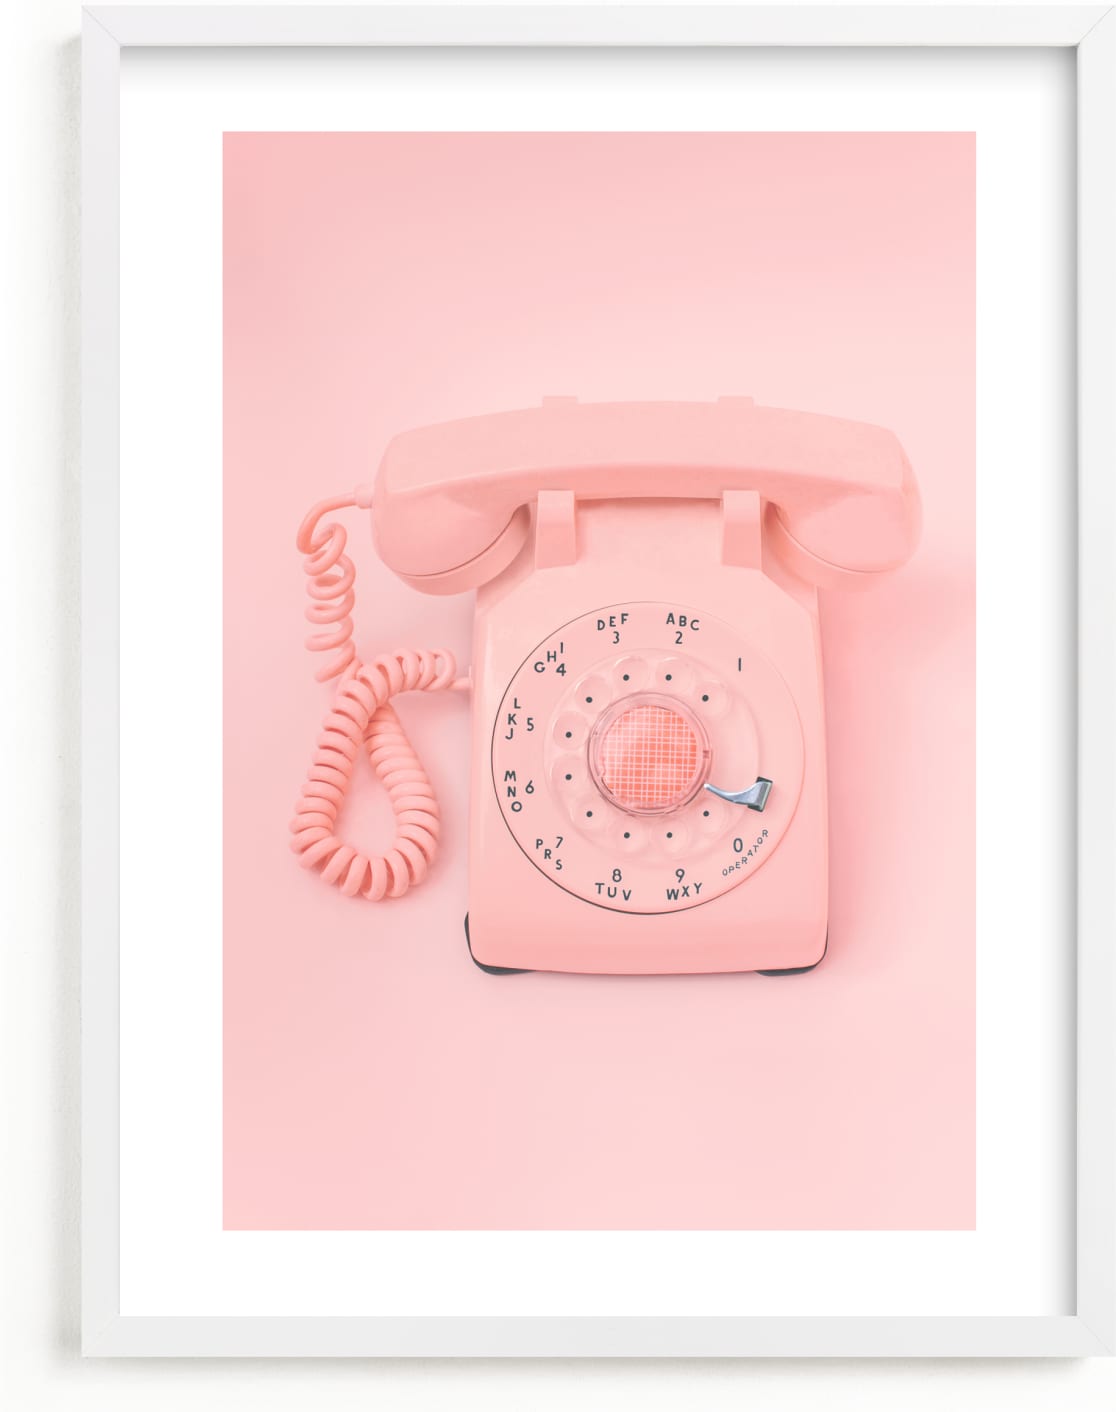 This is a pink kids wall art by Alicia Abla called 0 is for operator..